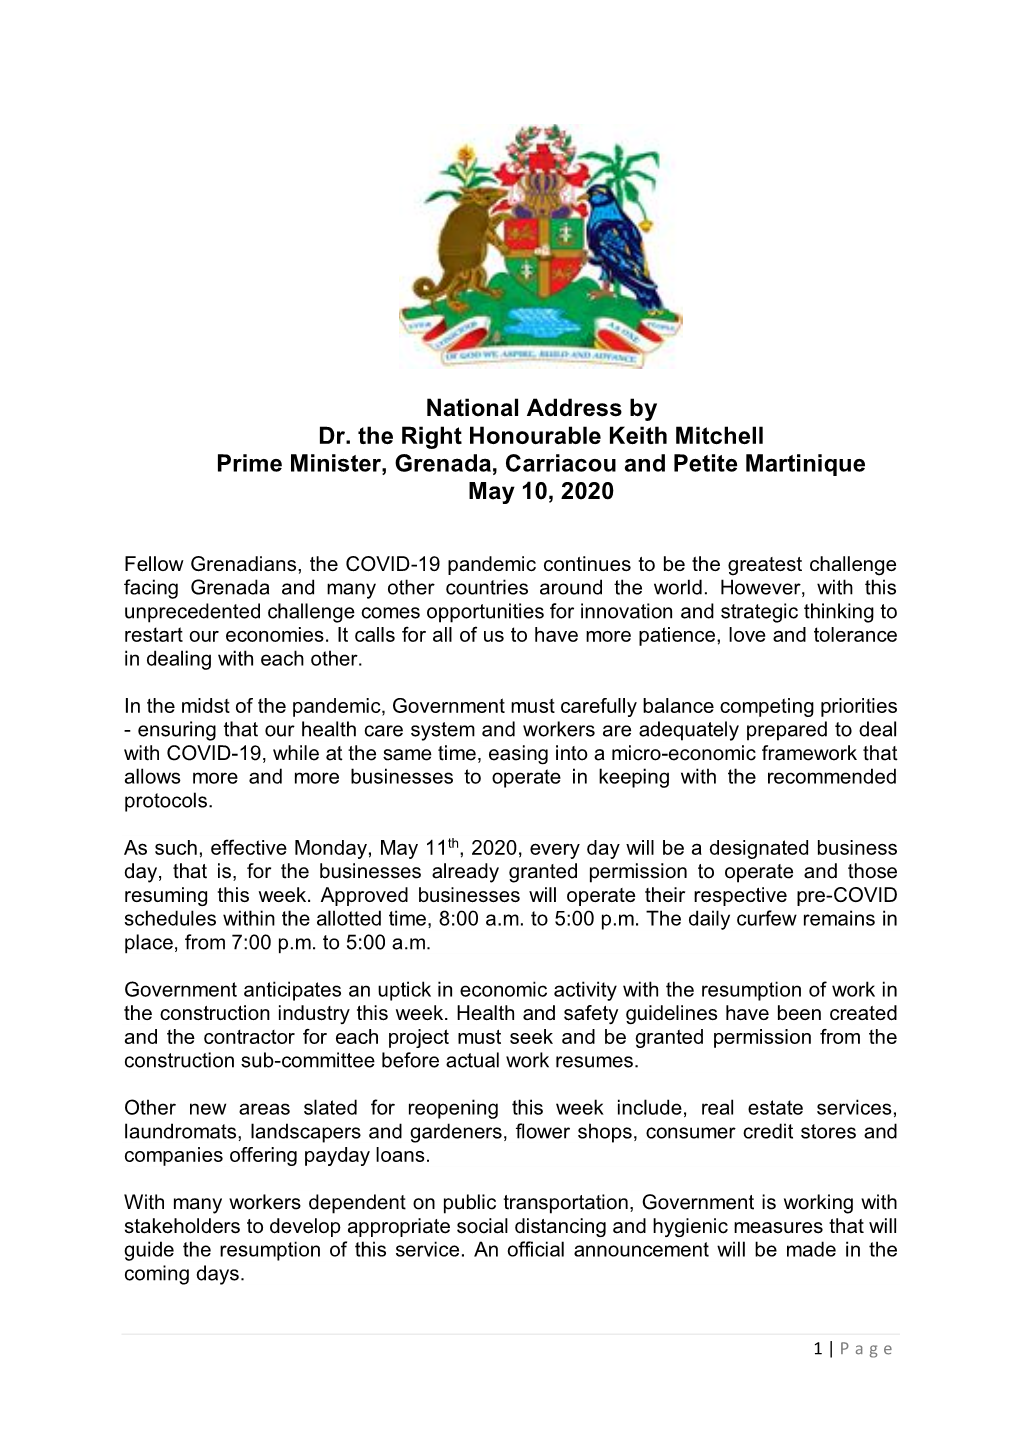 National Address by Prime Minister, Dr. the Rt. Hon. Keith Mitchell